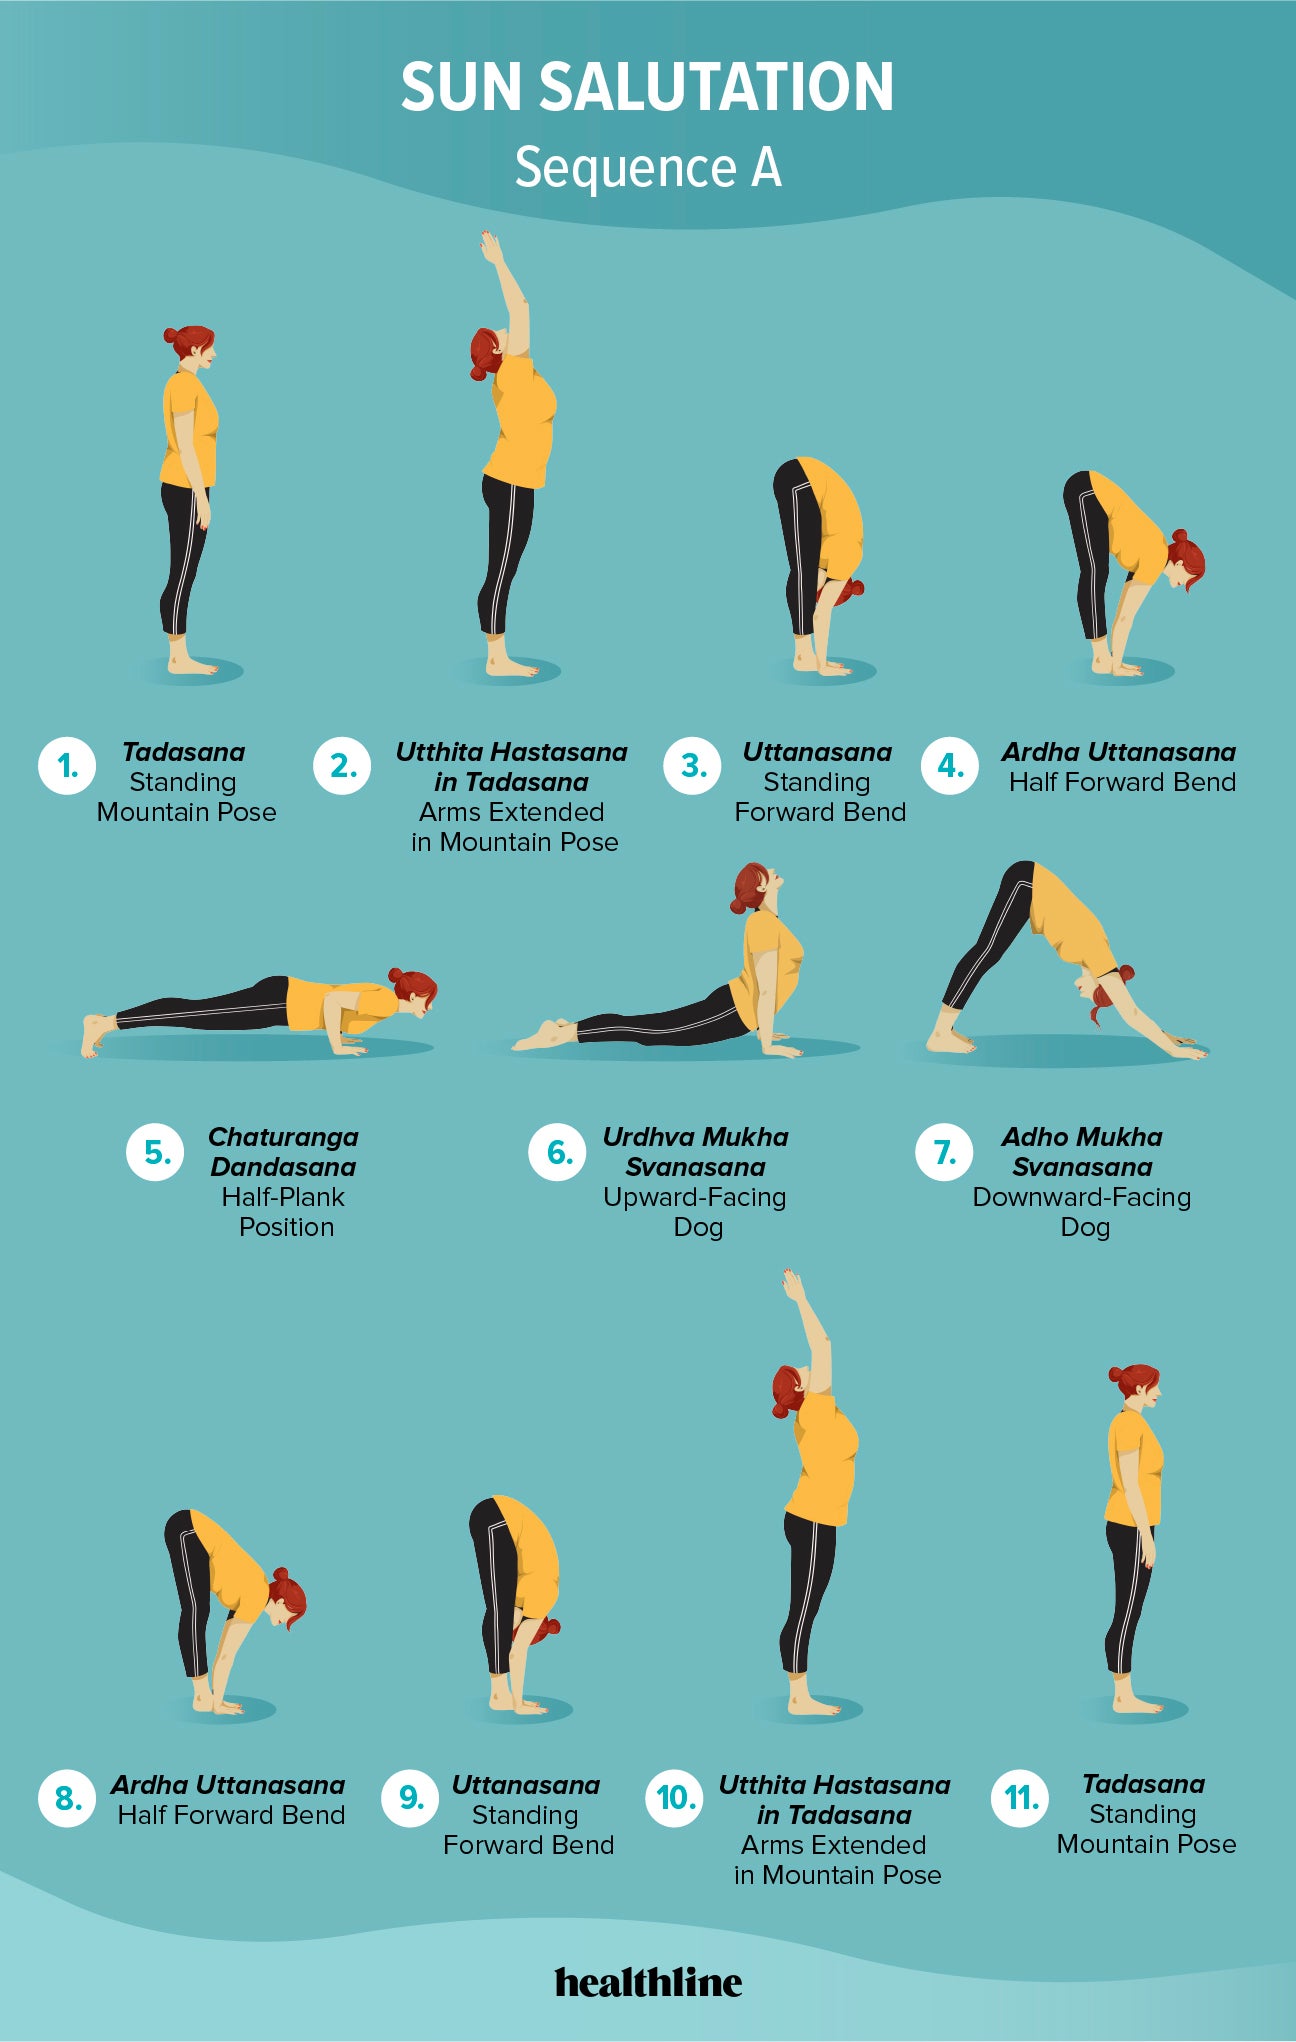 Sun Salutation Sequences A, B, and C A Complete Guide